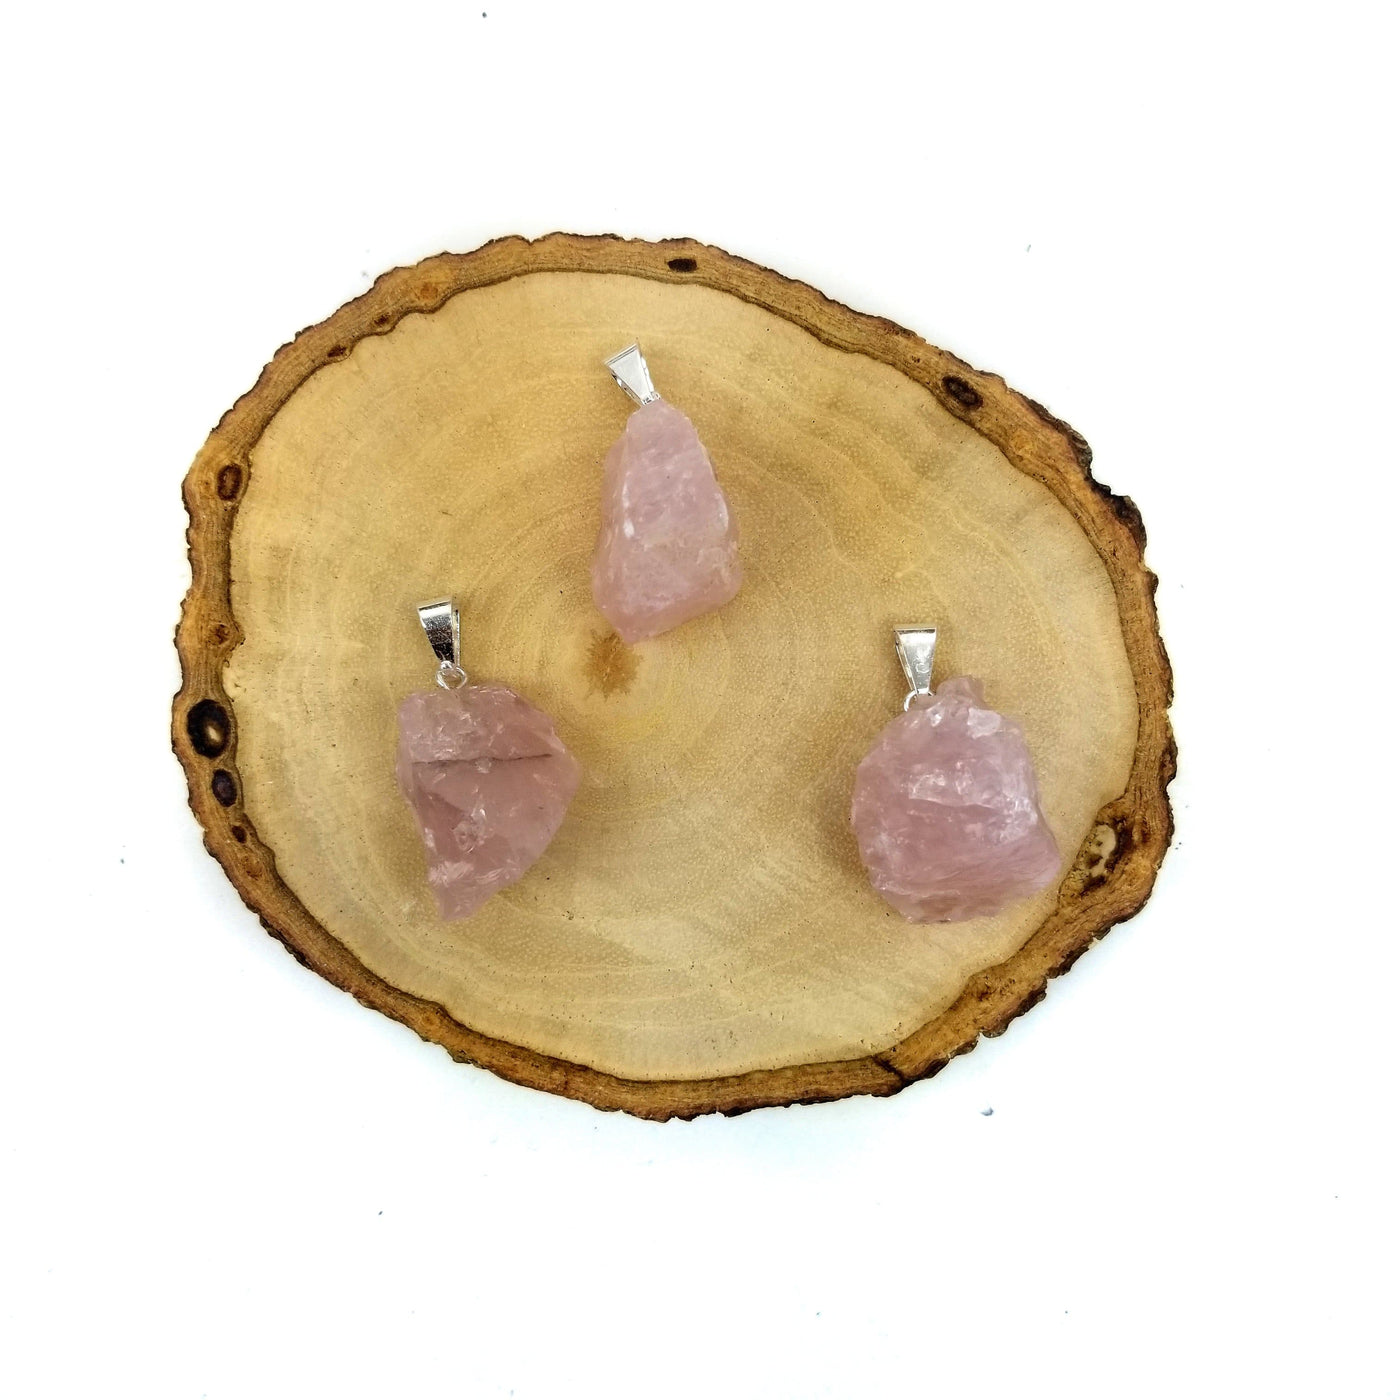 3 rose quartz pendants with silver bails on wooden coaster